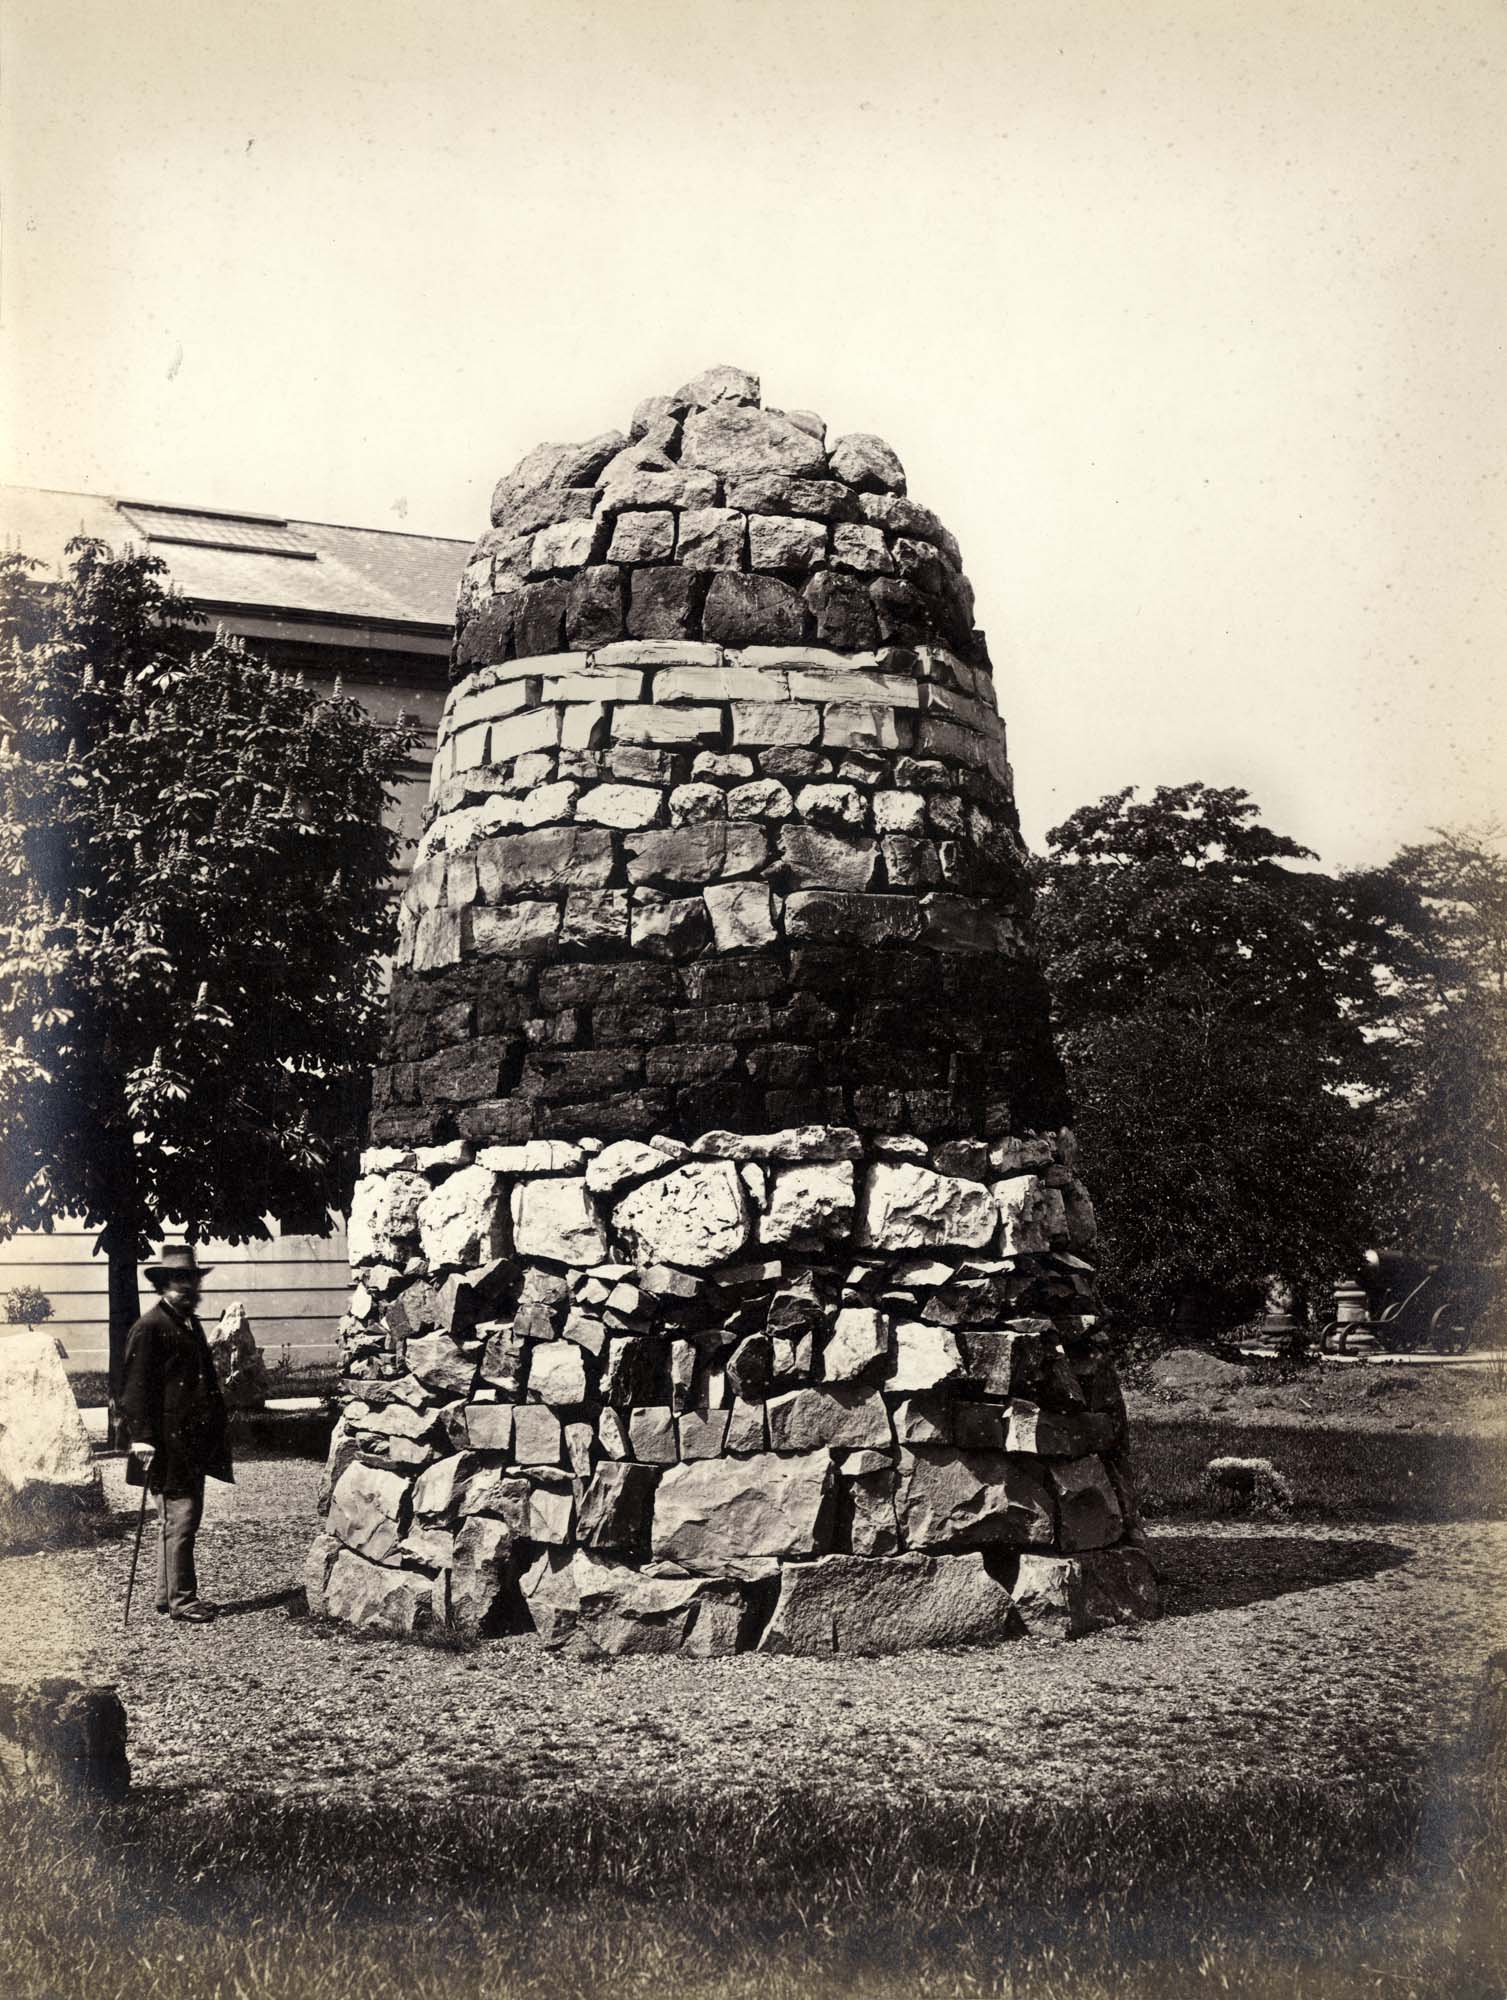 The 1869 'Column of Rocks' showing all the hard rocks of Leicestershire in their natural sequence. This exhibit was part of the museum gardens that were built over by the art school expansion. -